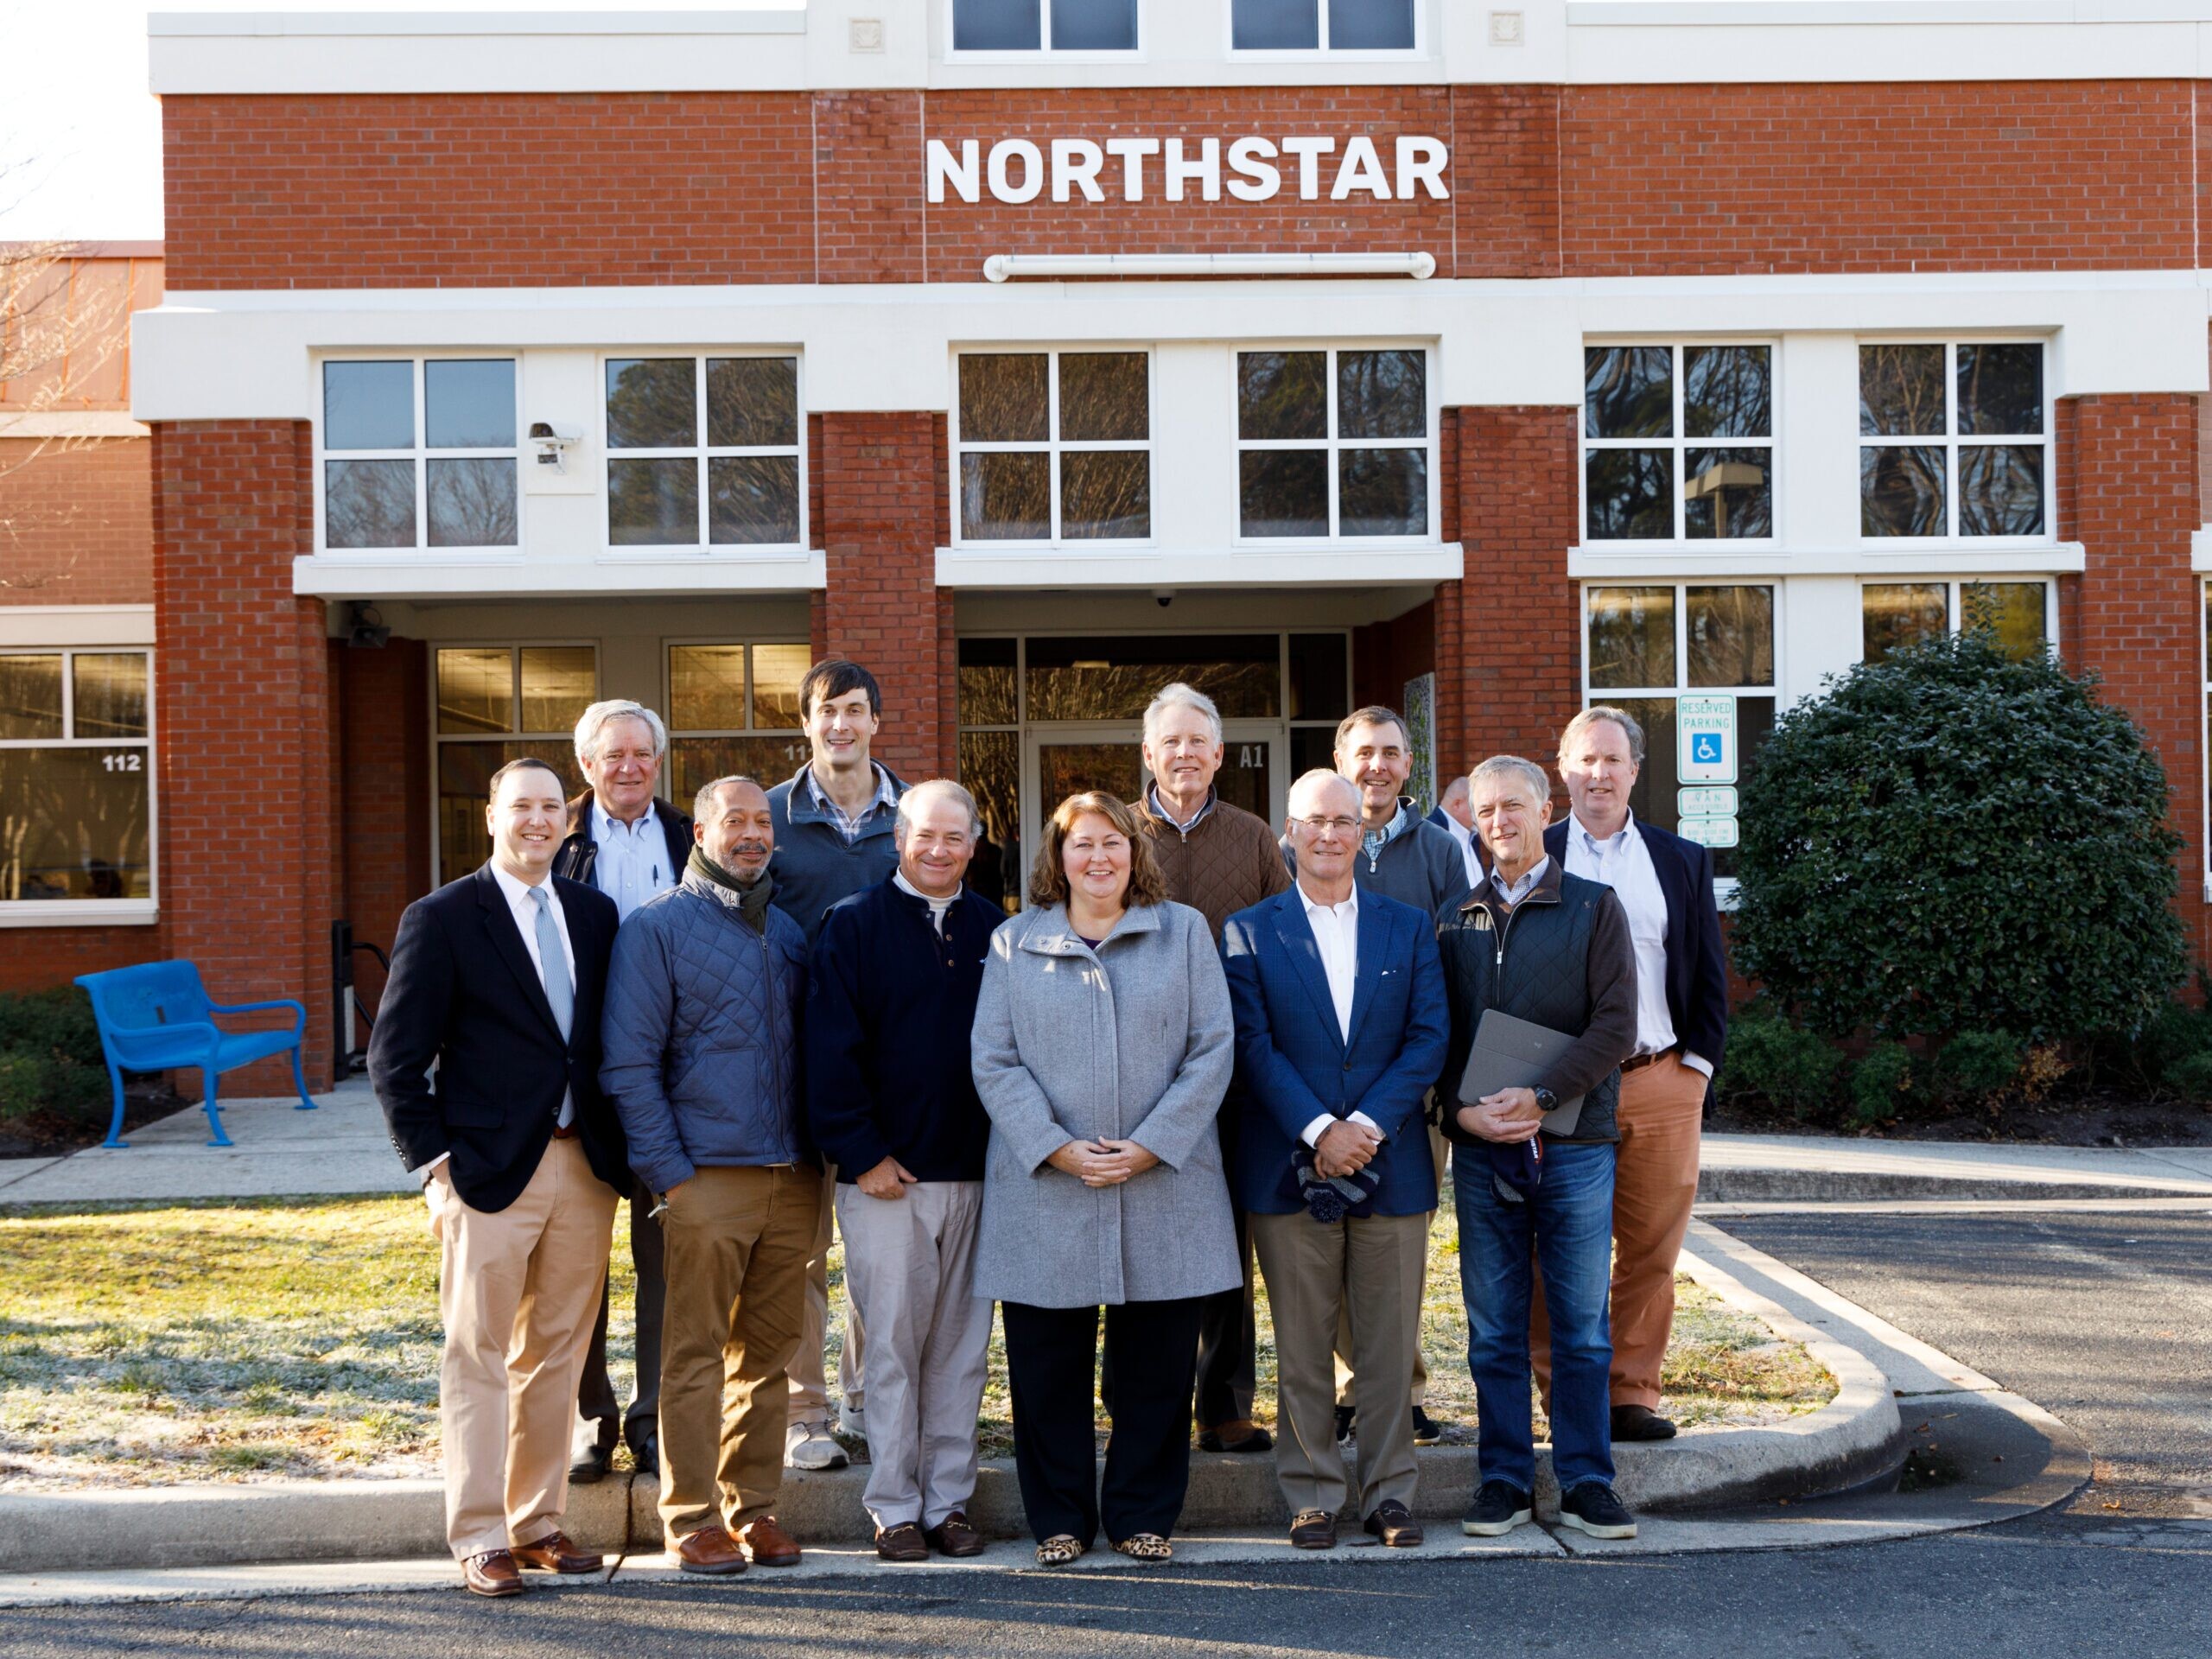 IMG 5ten male board meembers standing in front of Northstar school building with female head of school in center of group529